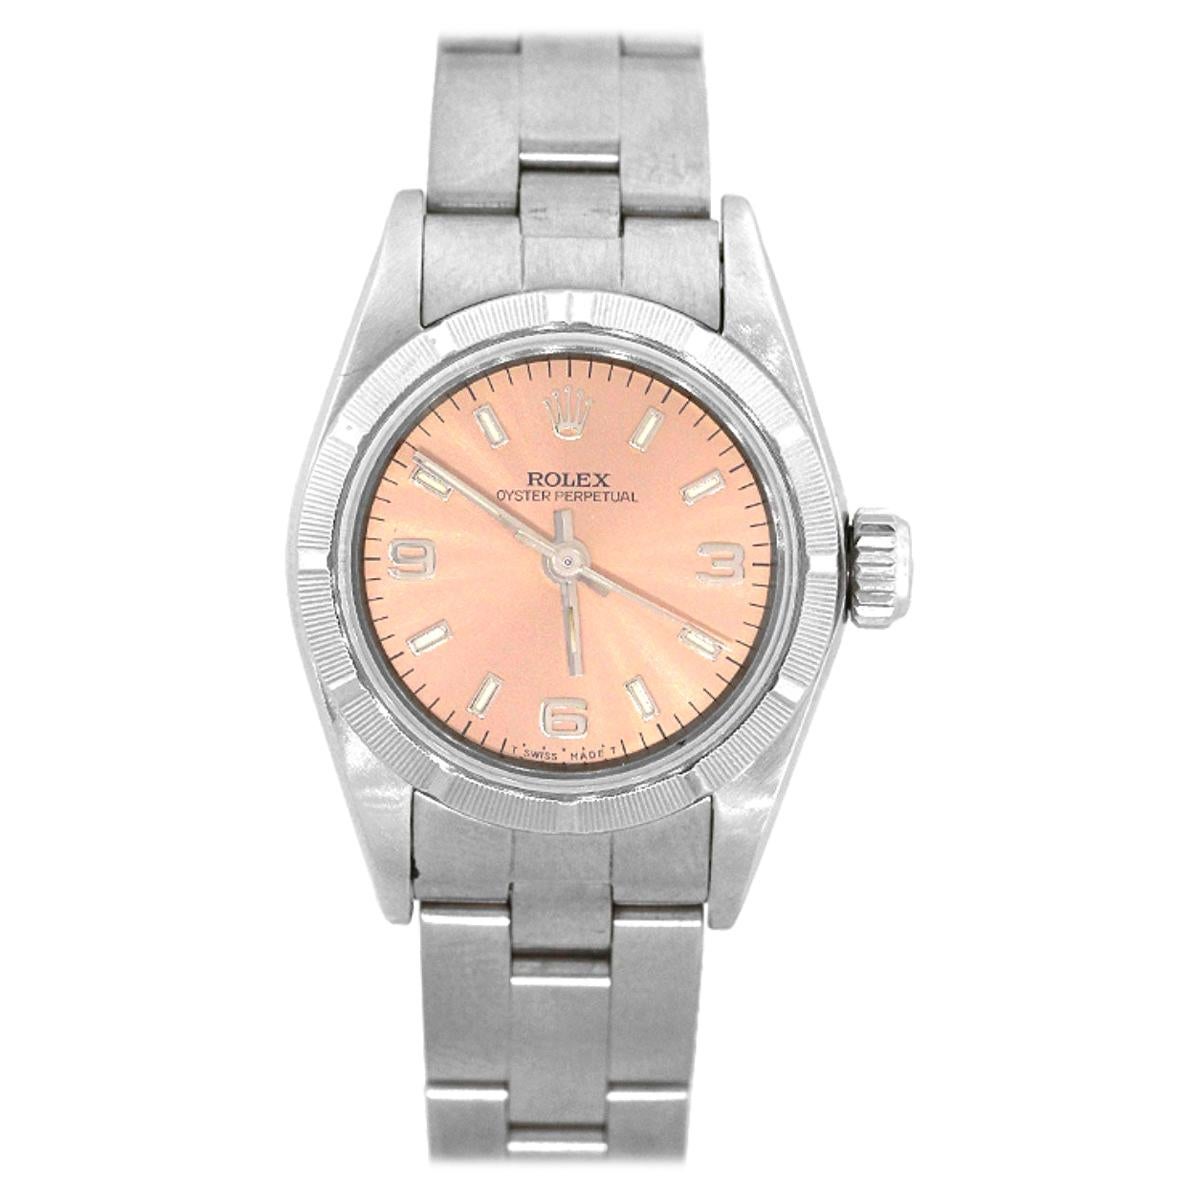 Rolex 67230 Oyster perpetual Salmon Dial Ladies Watch